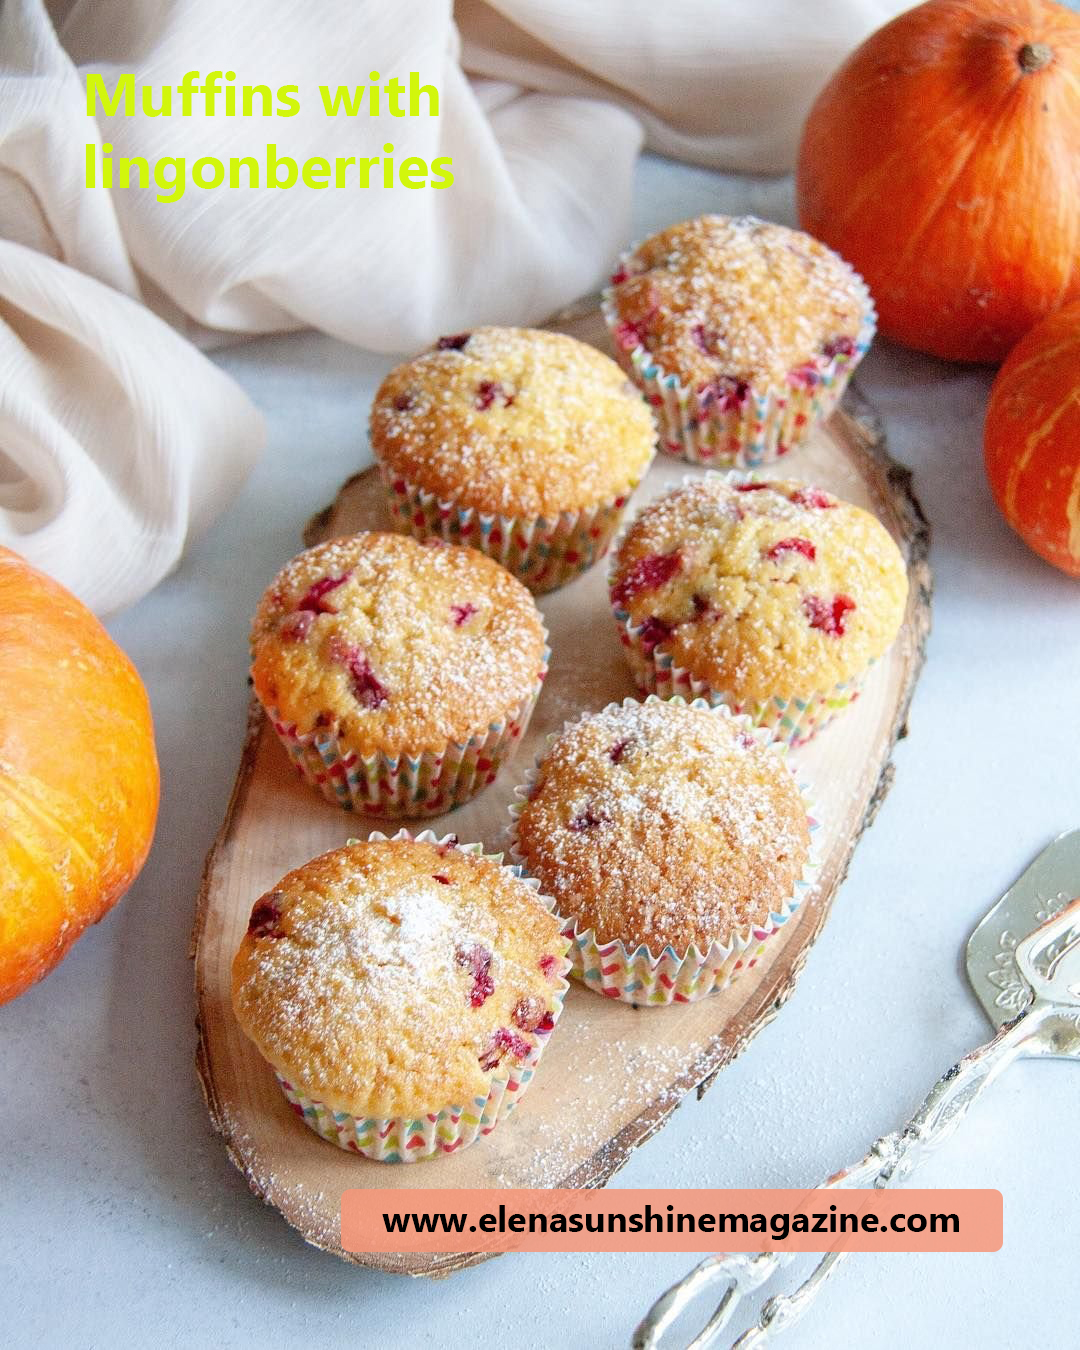 Muffins with lingonberries